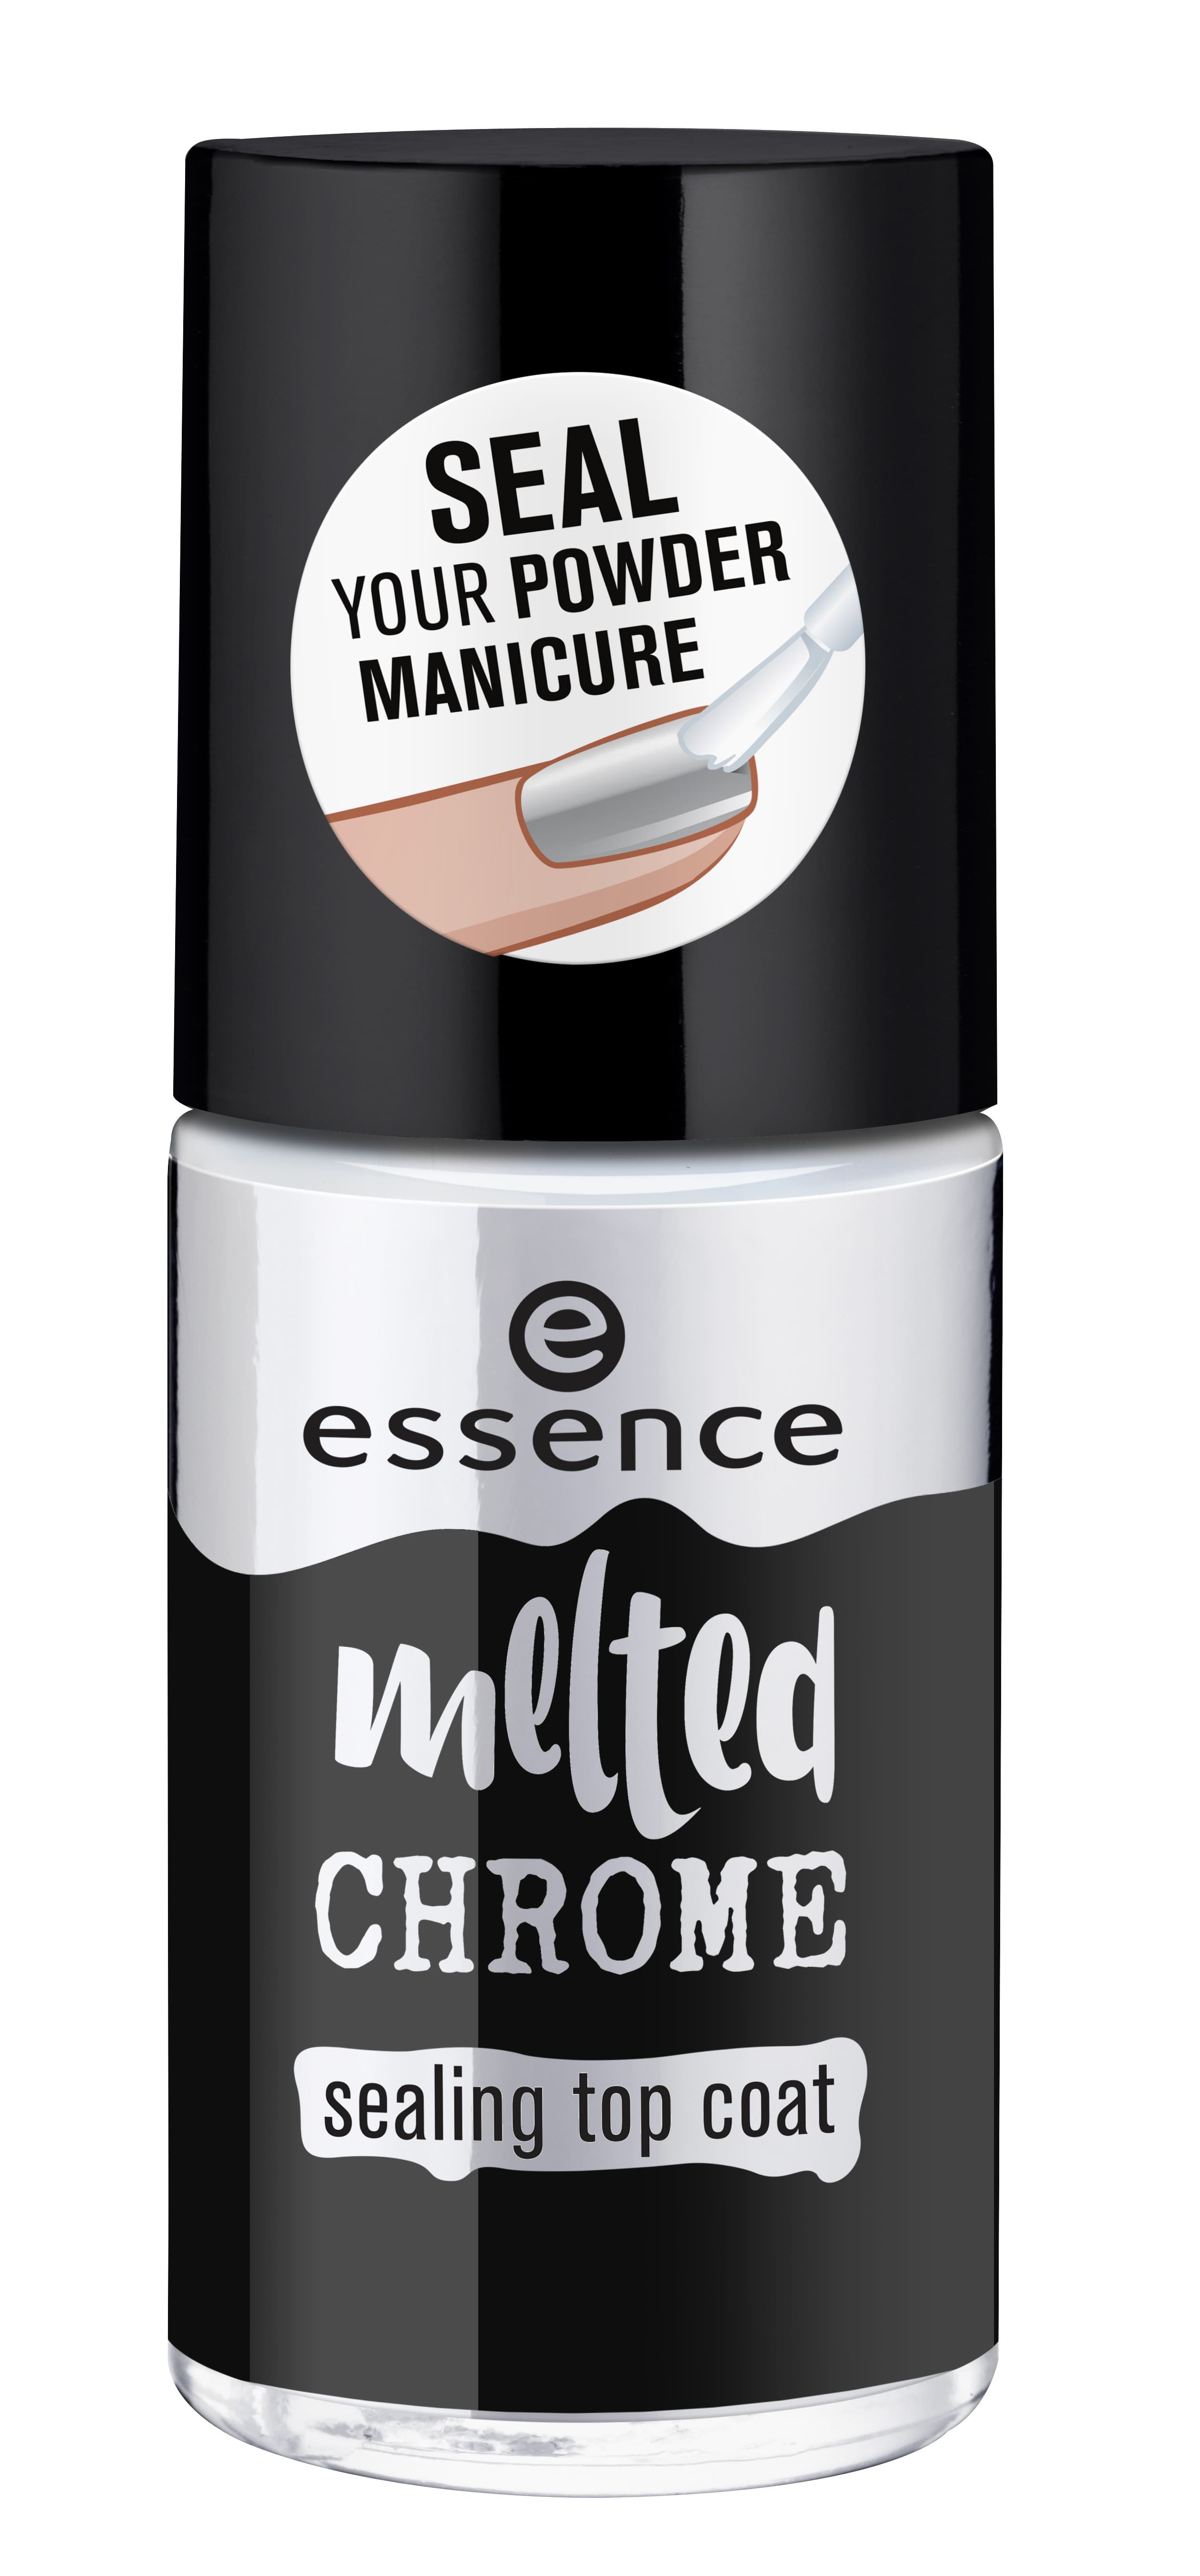 essence-melted-chrome-sealing-top-coat-e3-80-10-55-16